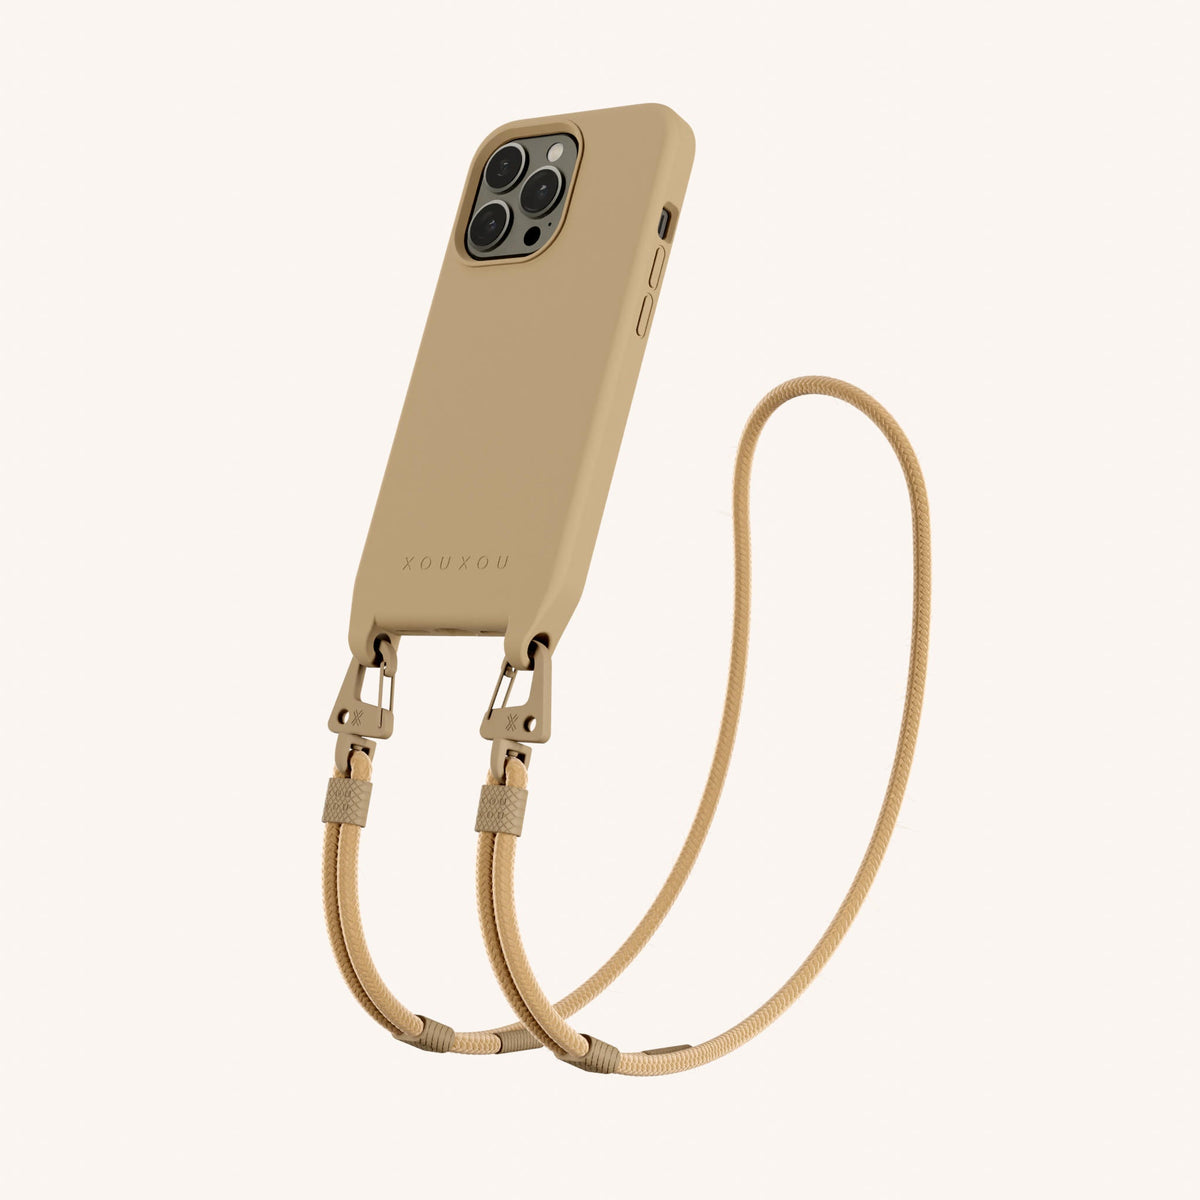 Phone Necklace with Carabiner Rope for iPhone 13 Pro with MagSafe in Sand Perspective View | XOUXOU #phone model_iphone 13 pro